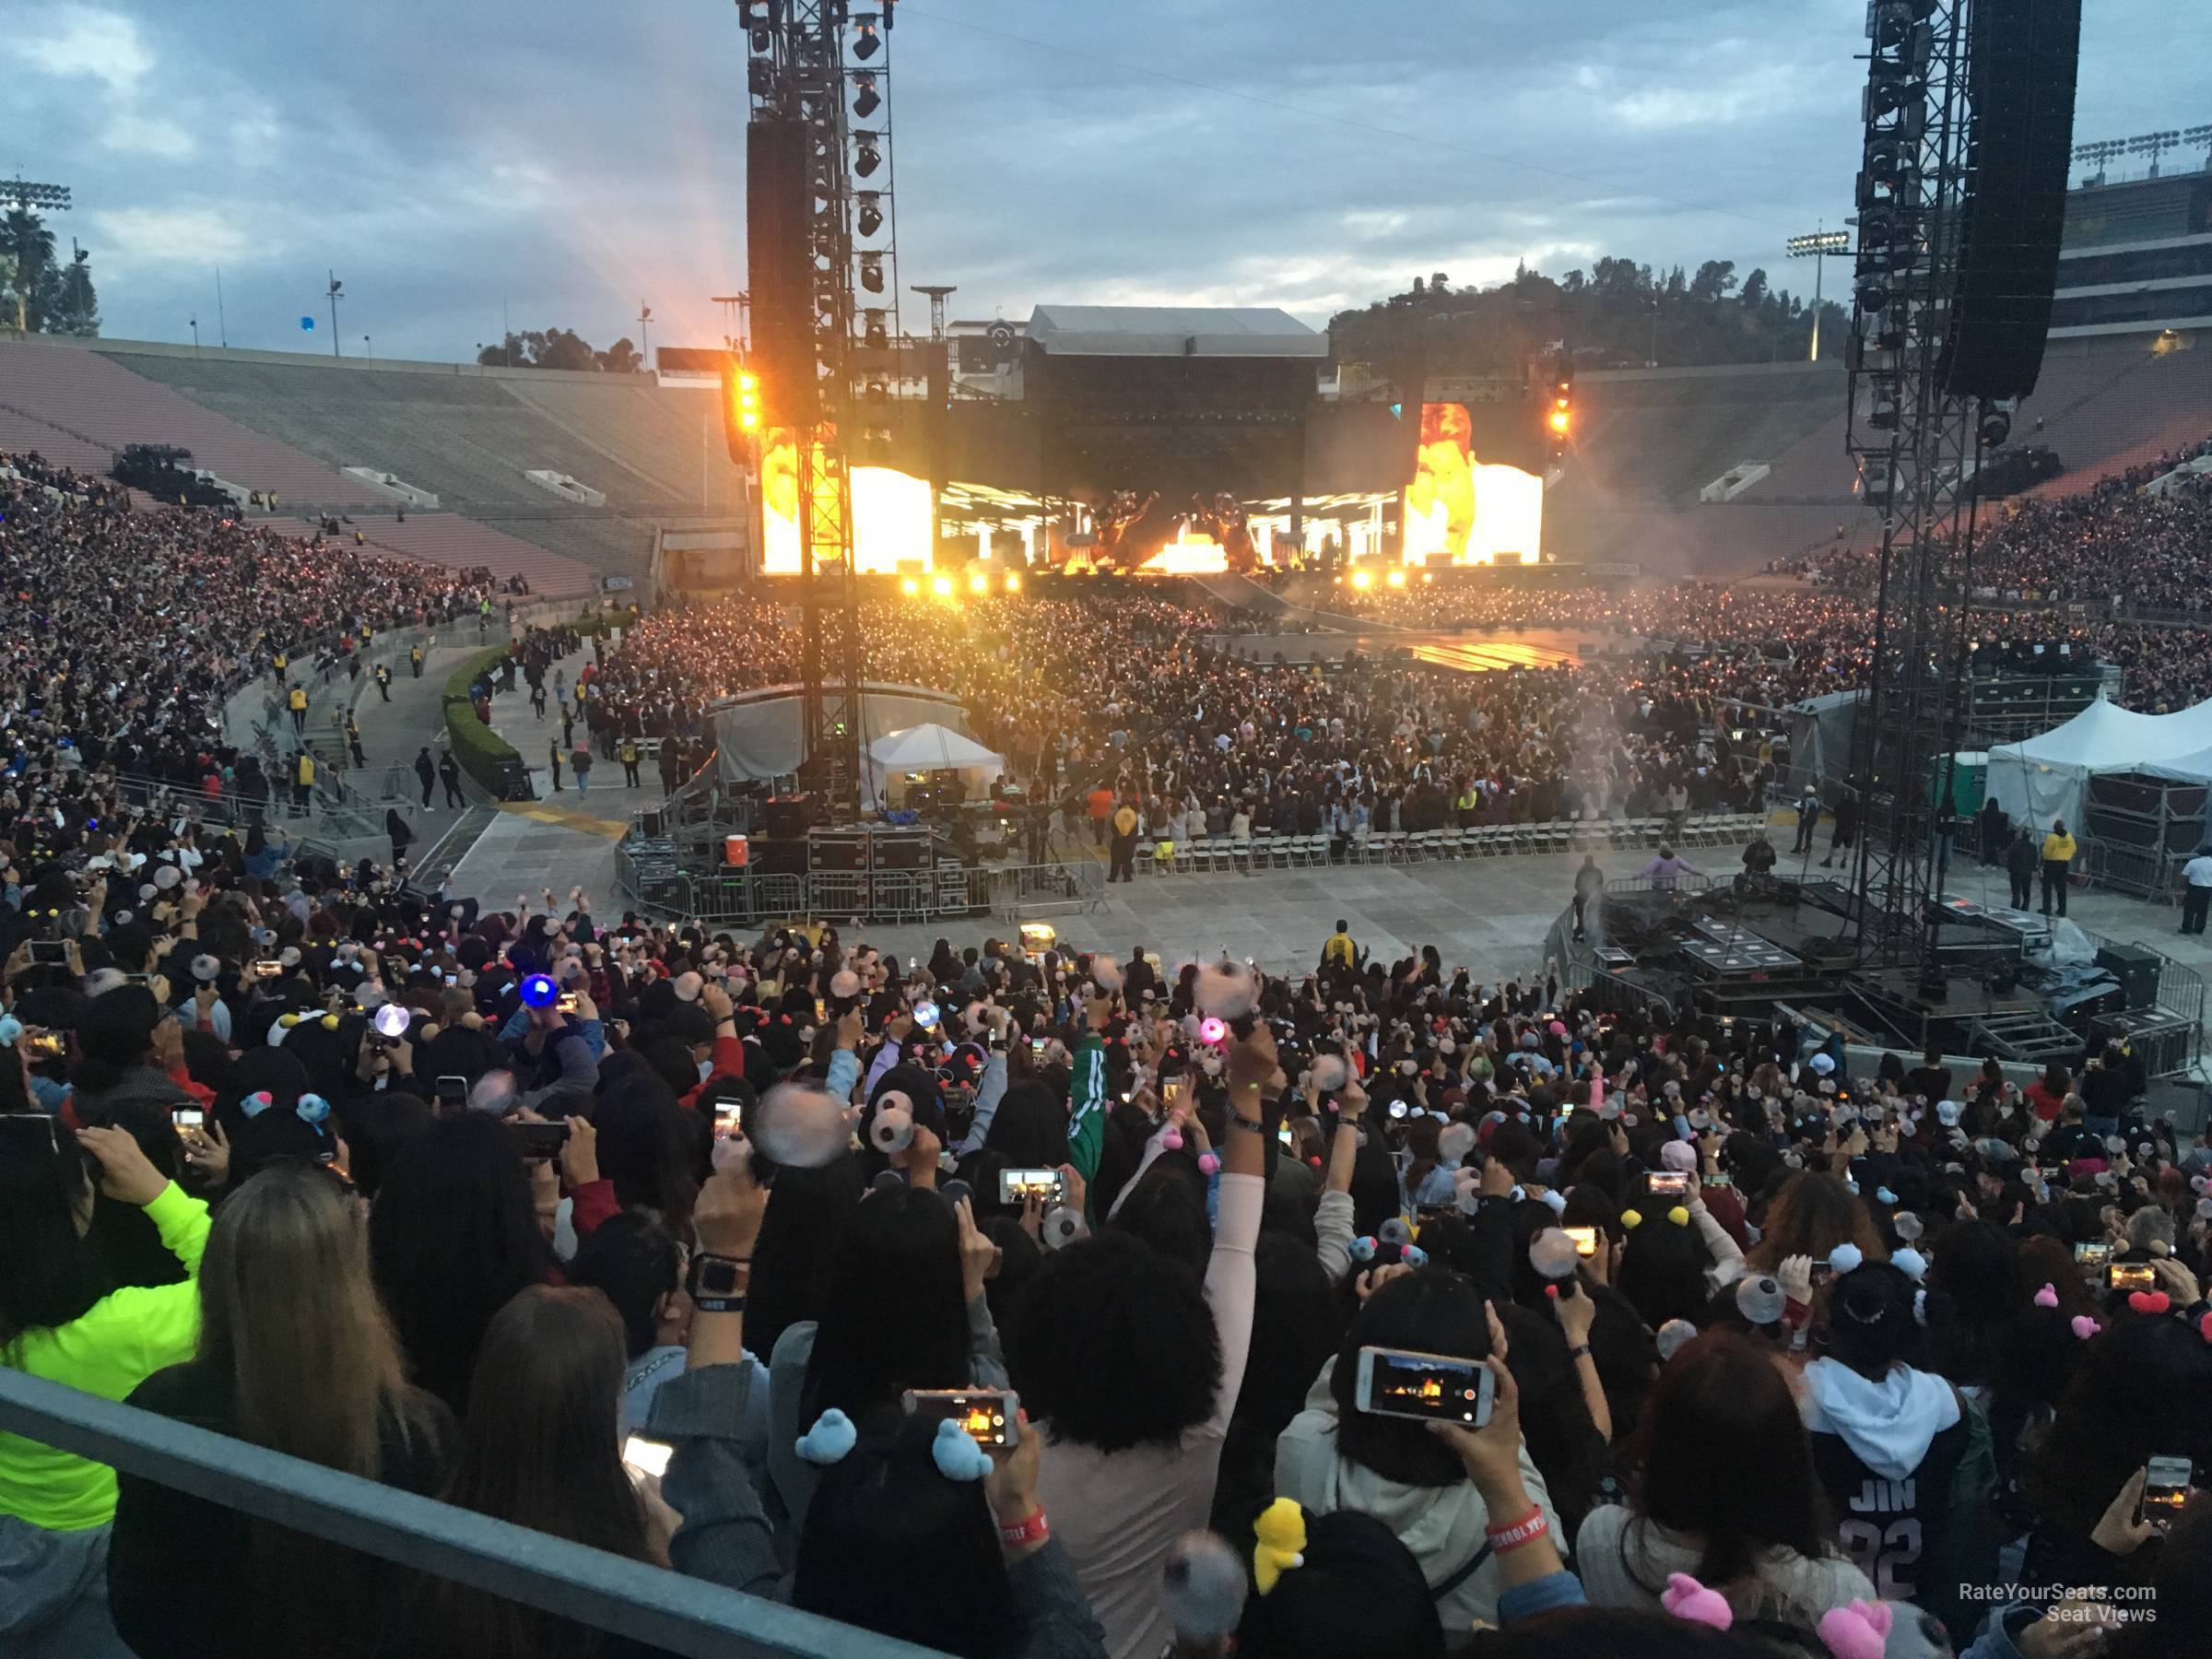 section 10, row 30 seat view  for concert - rose bowl stadium